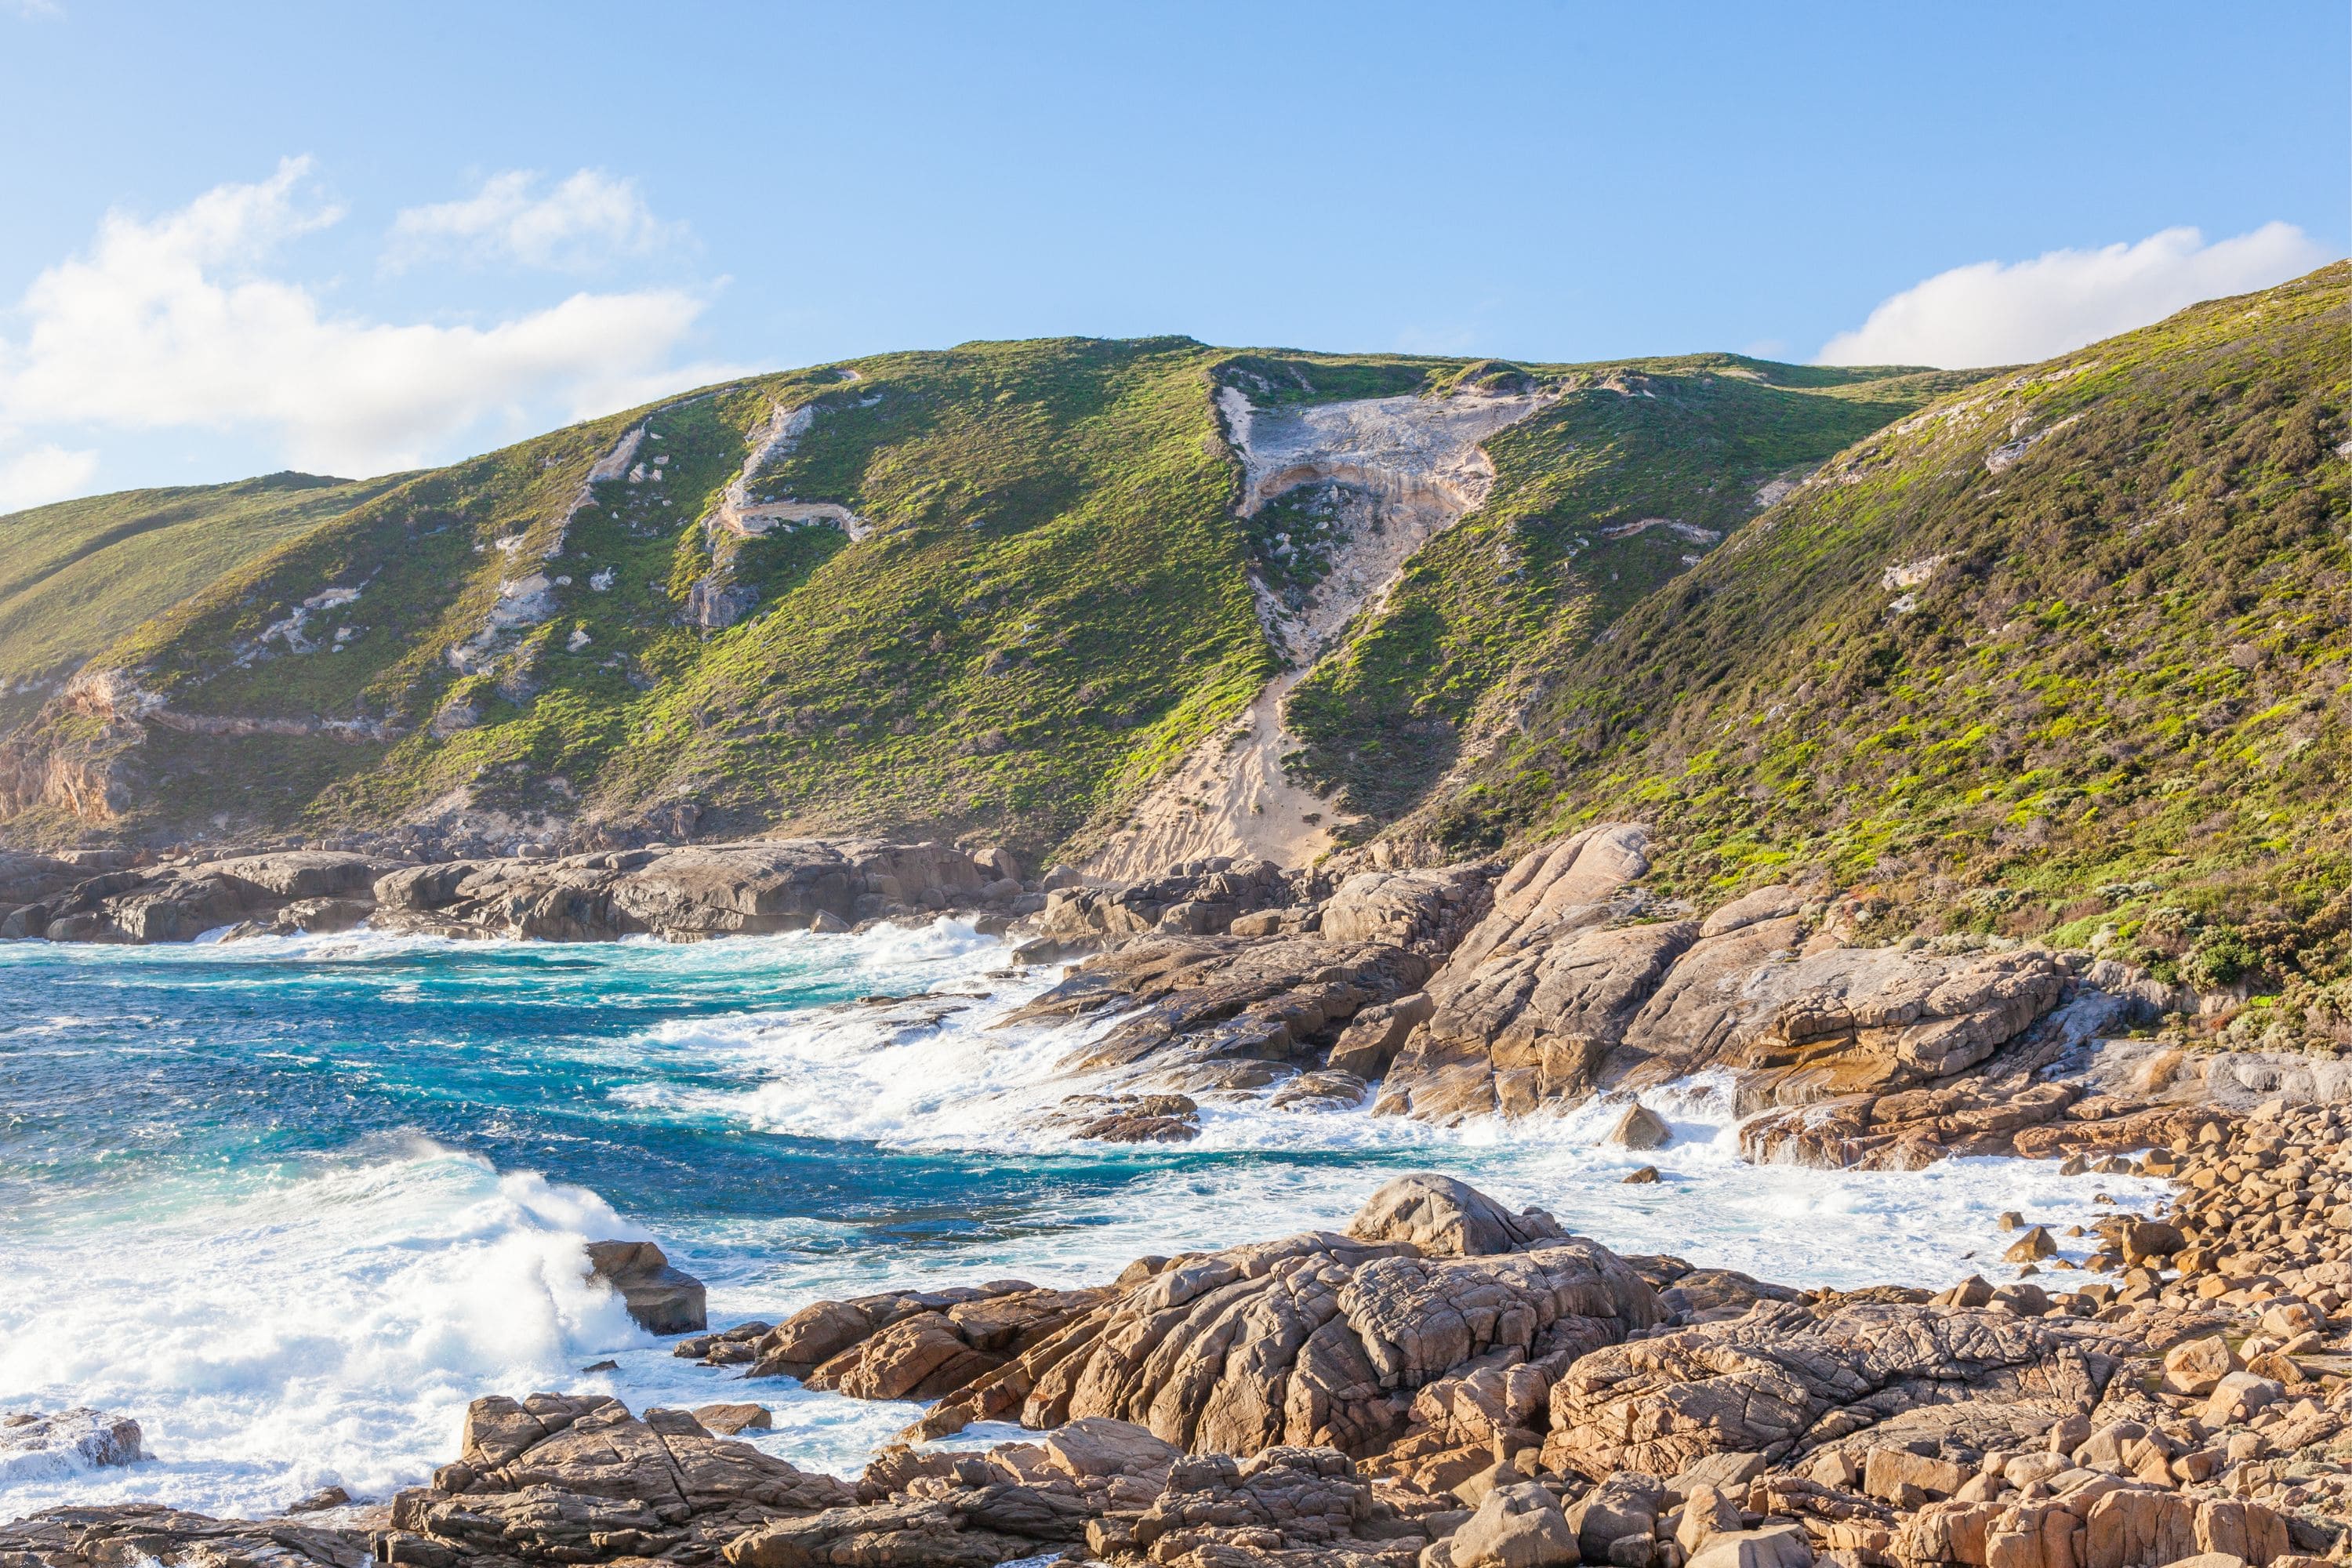 Torndirrup National Park in Albany